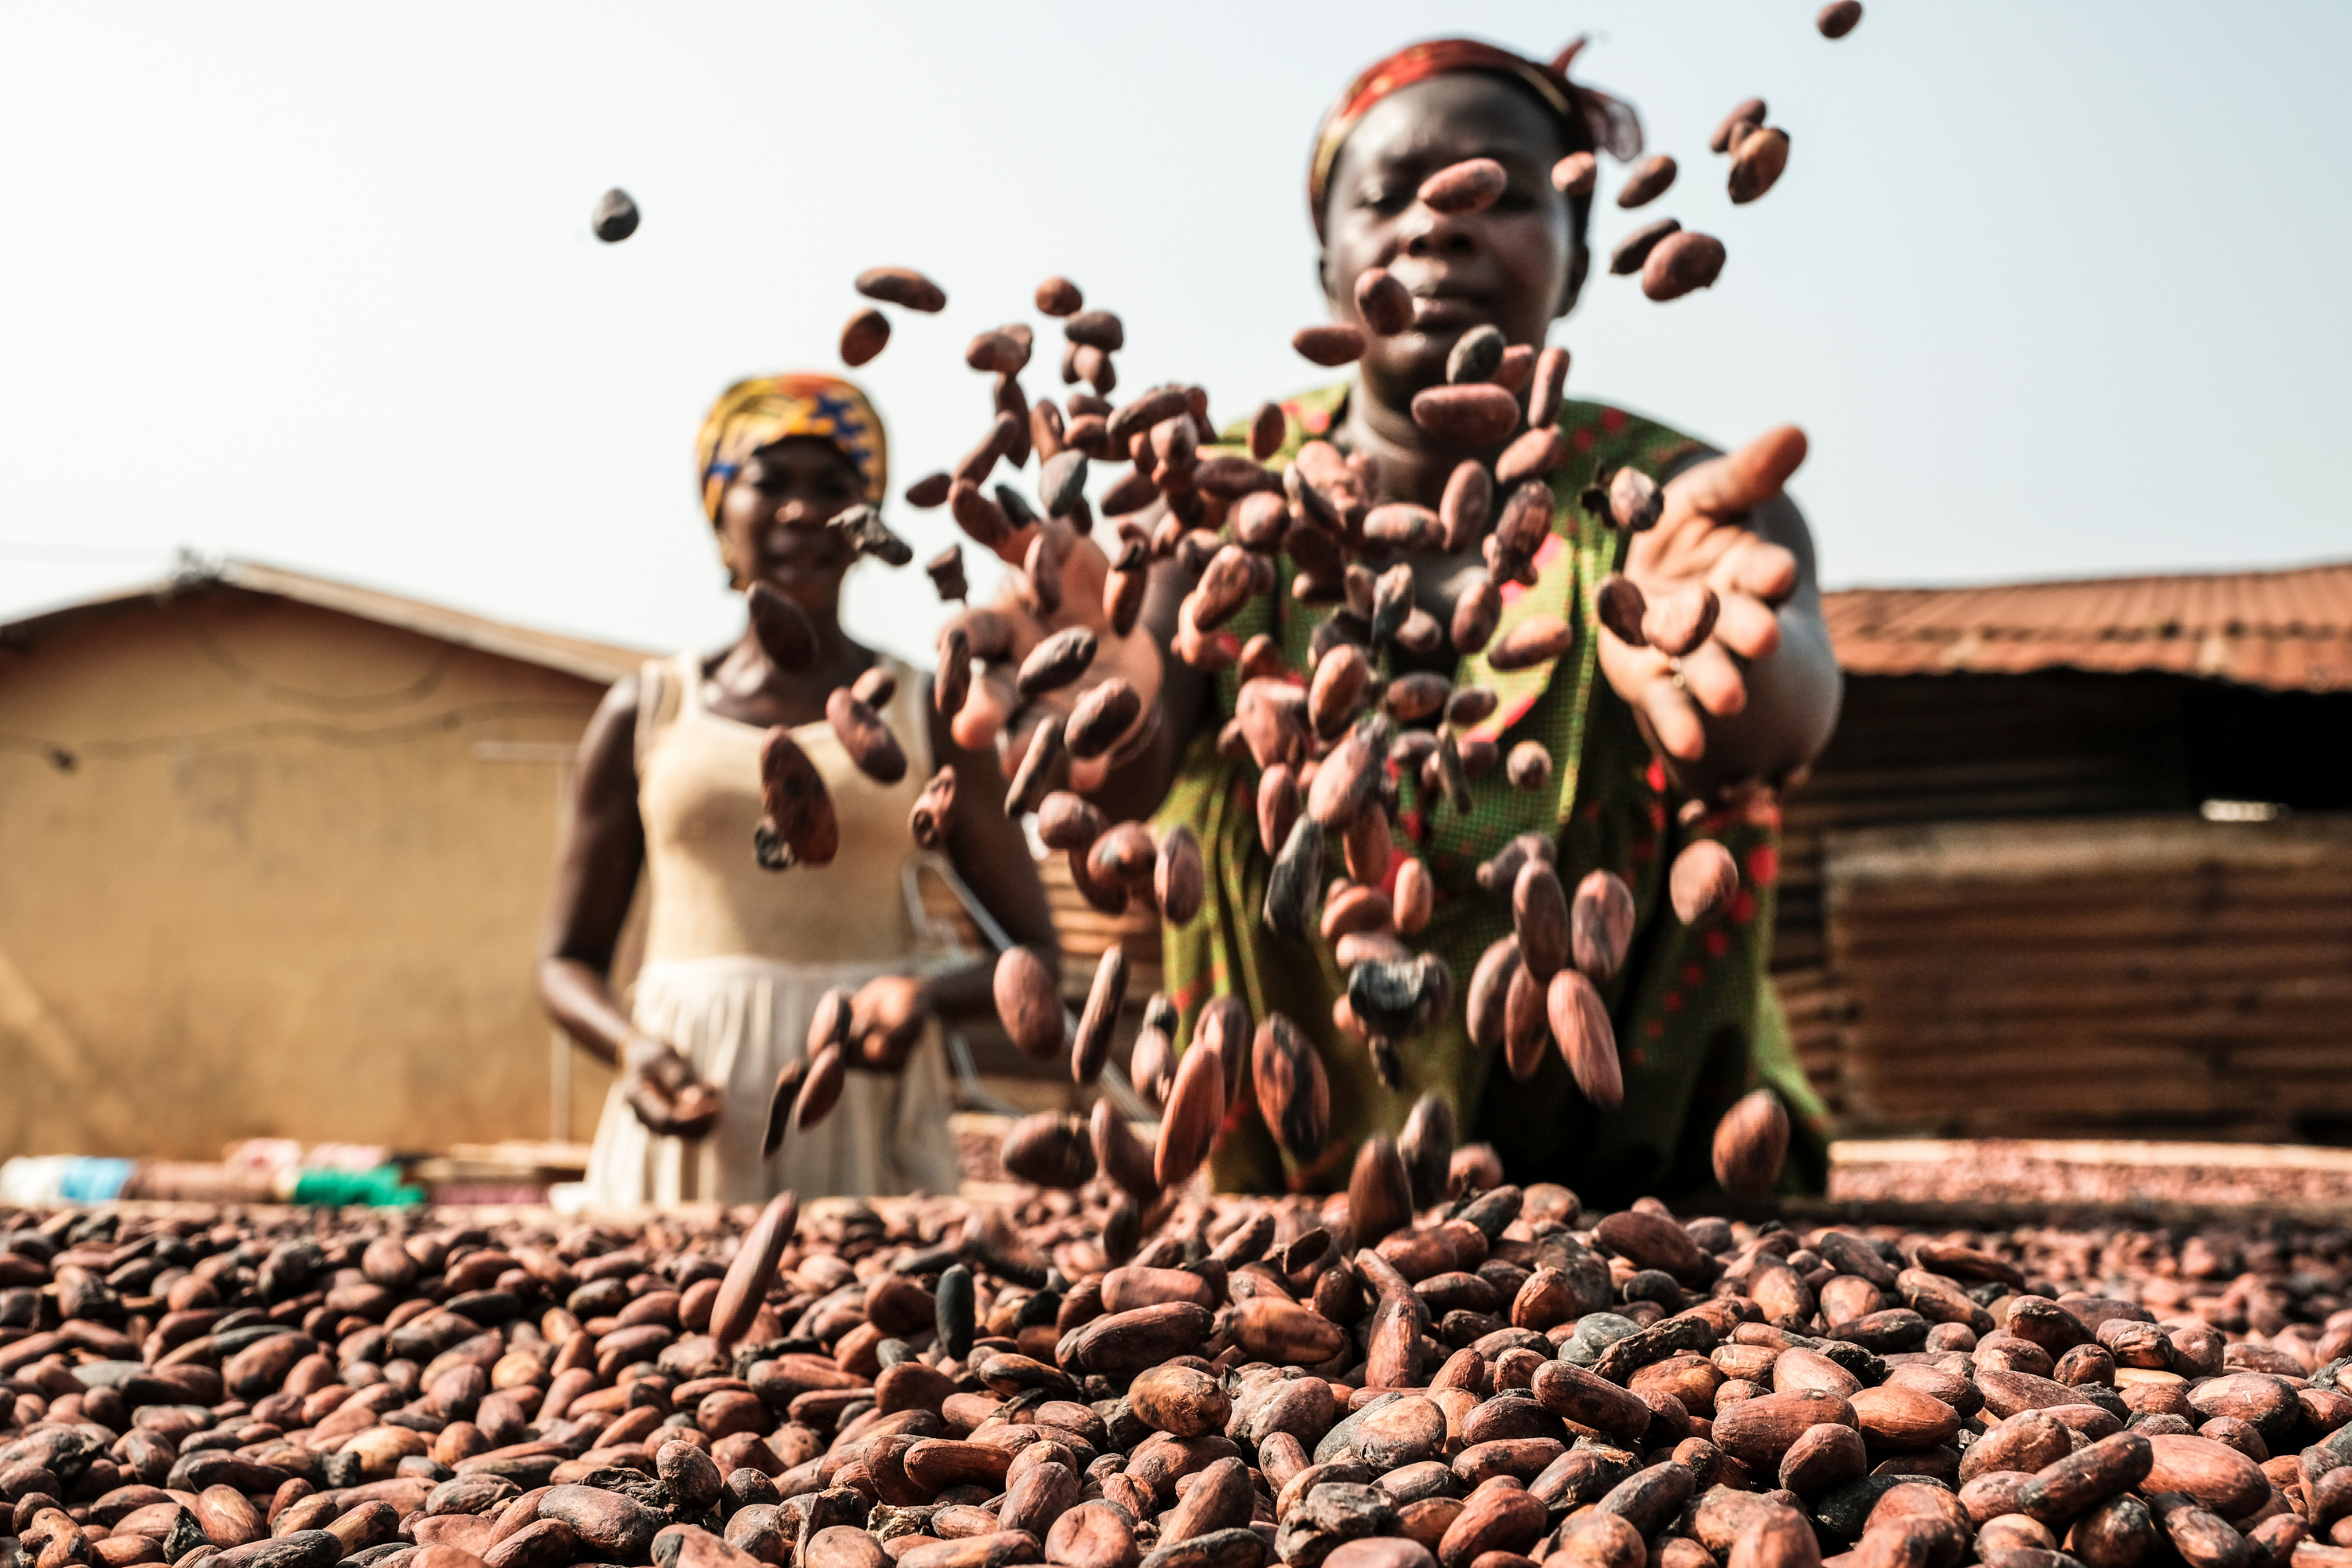 Lindt & Sprüngli achieves sustainability milestone: 100% traceable and verified cocoa beans